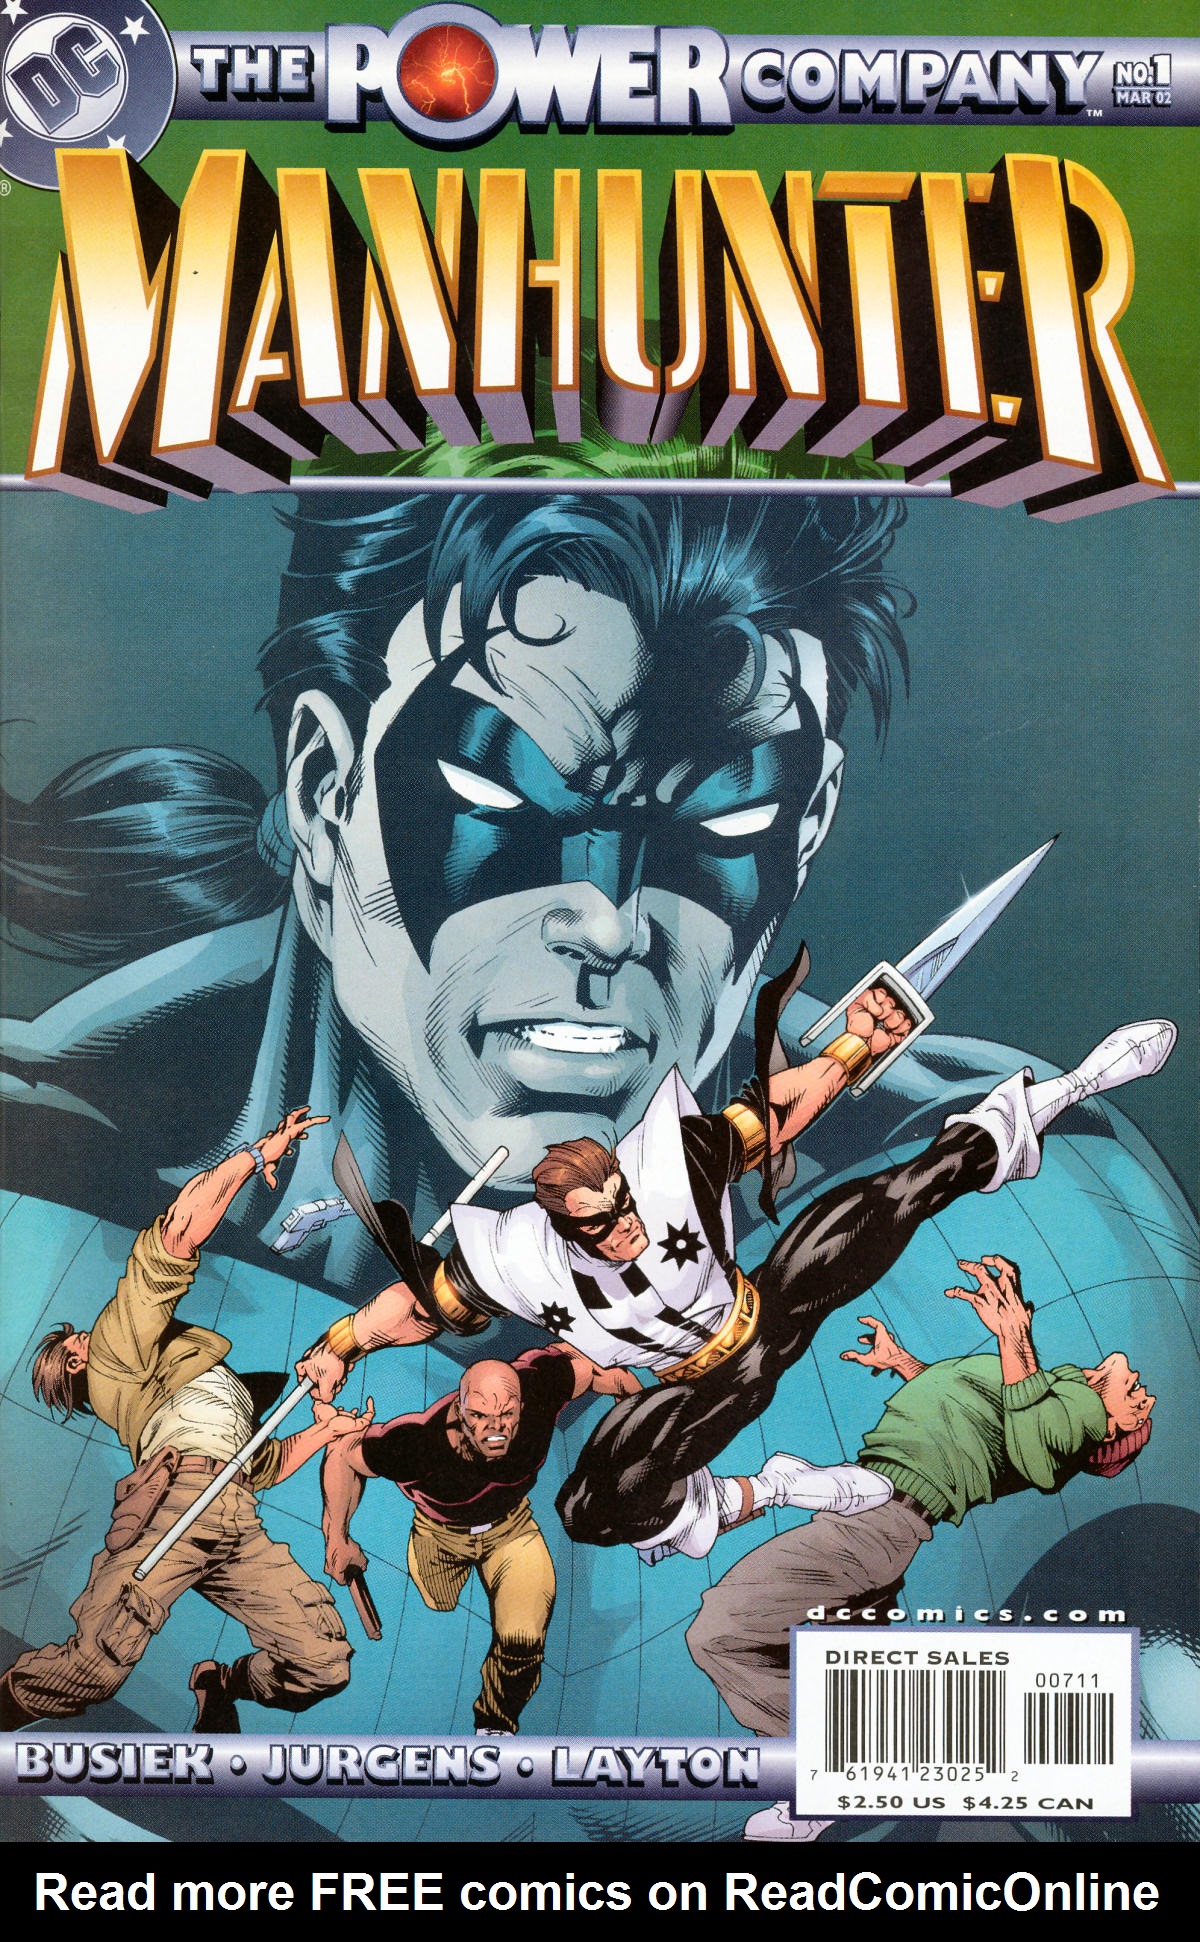 Read online The Power Company: Manhunter comic -  Issue # Full - 1